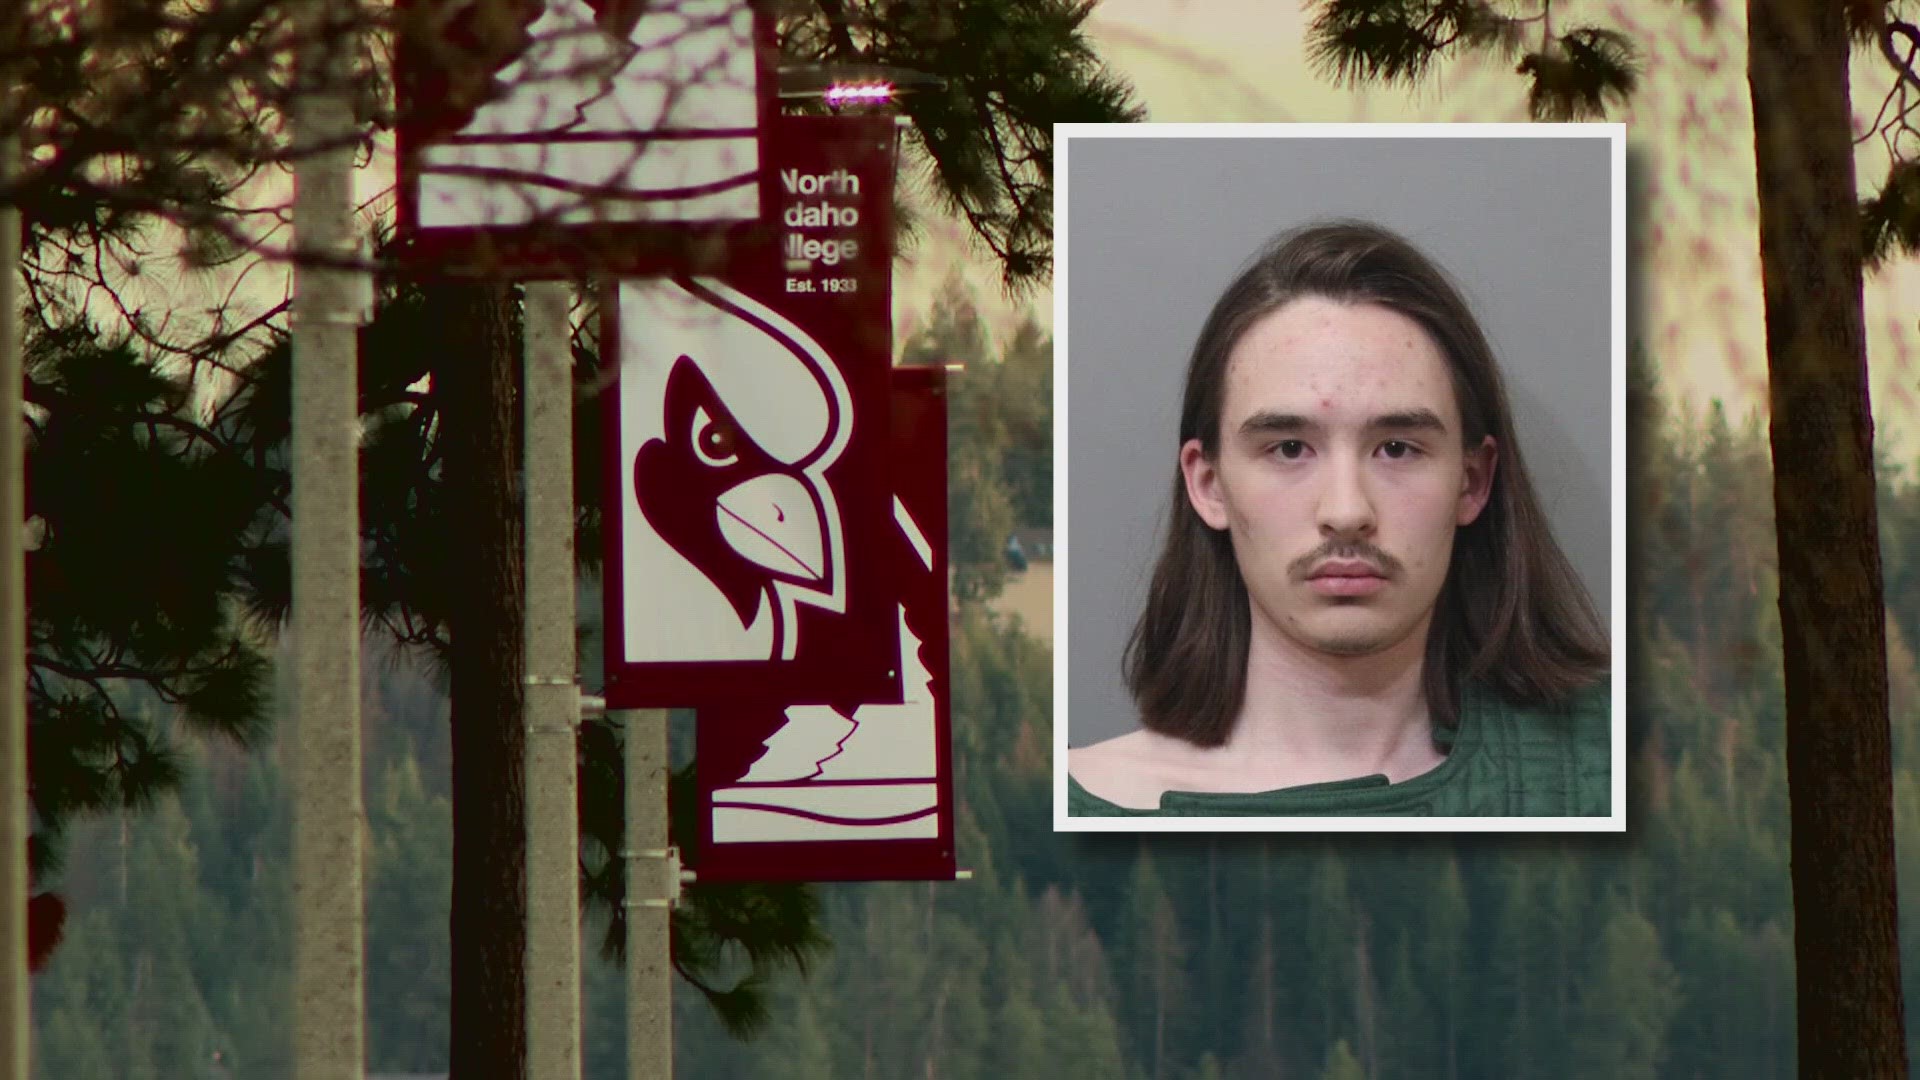 18-year-old Alexander Scott Mercurio allegedly planned to attack people at churches in Coeur d'Alene on April 7 before he was arrested.